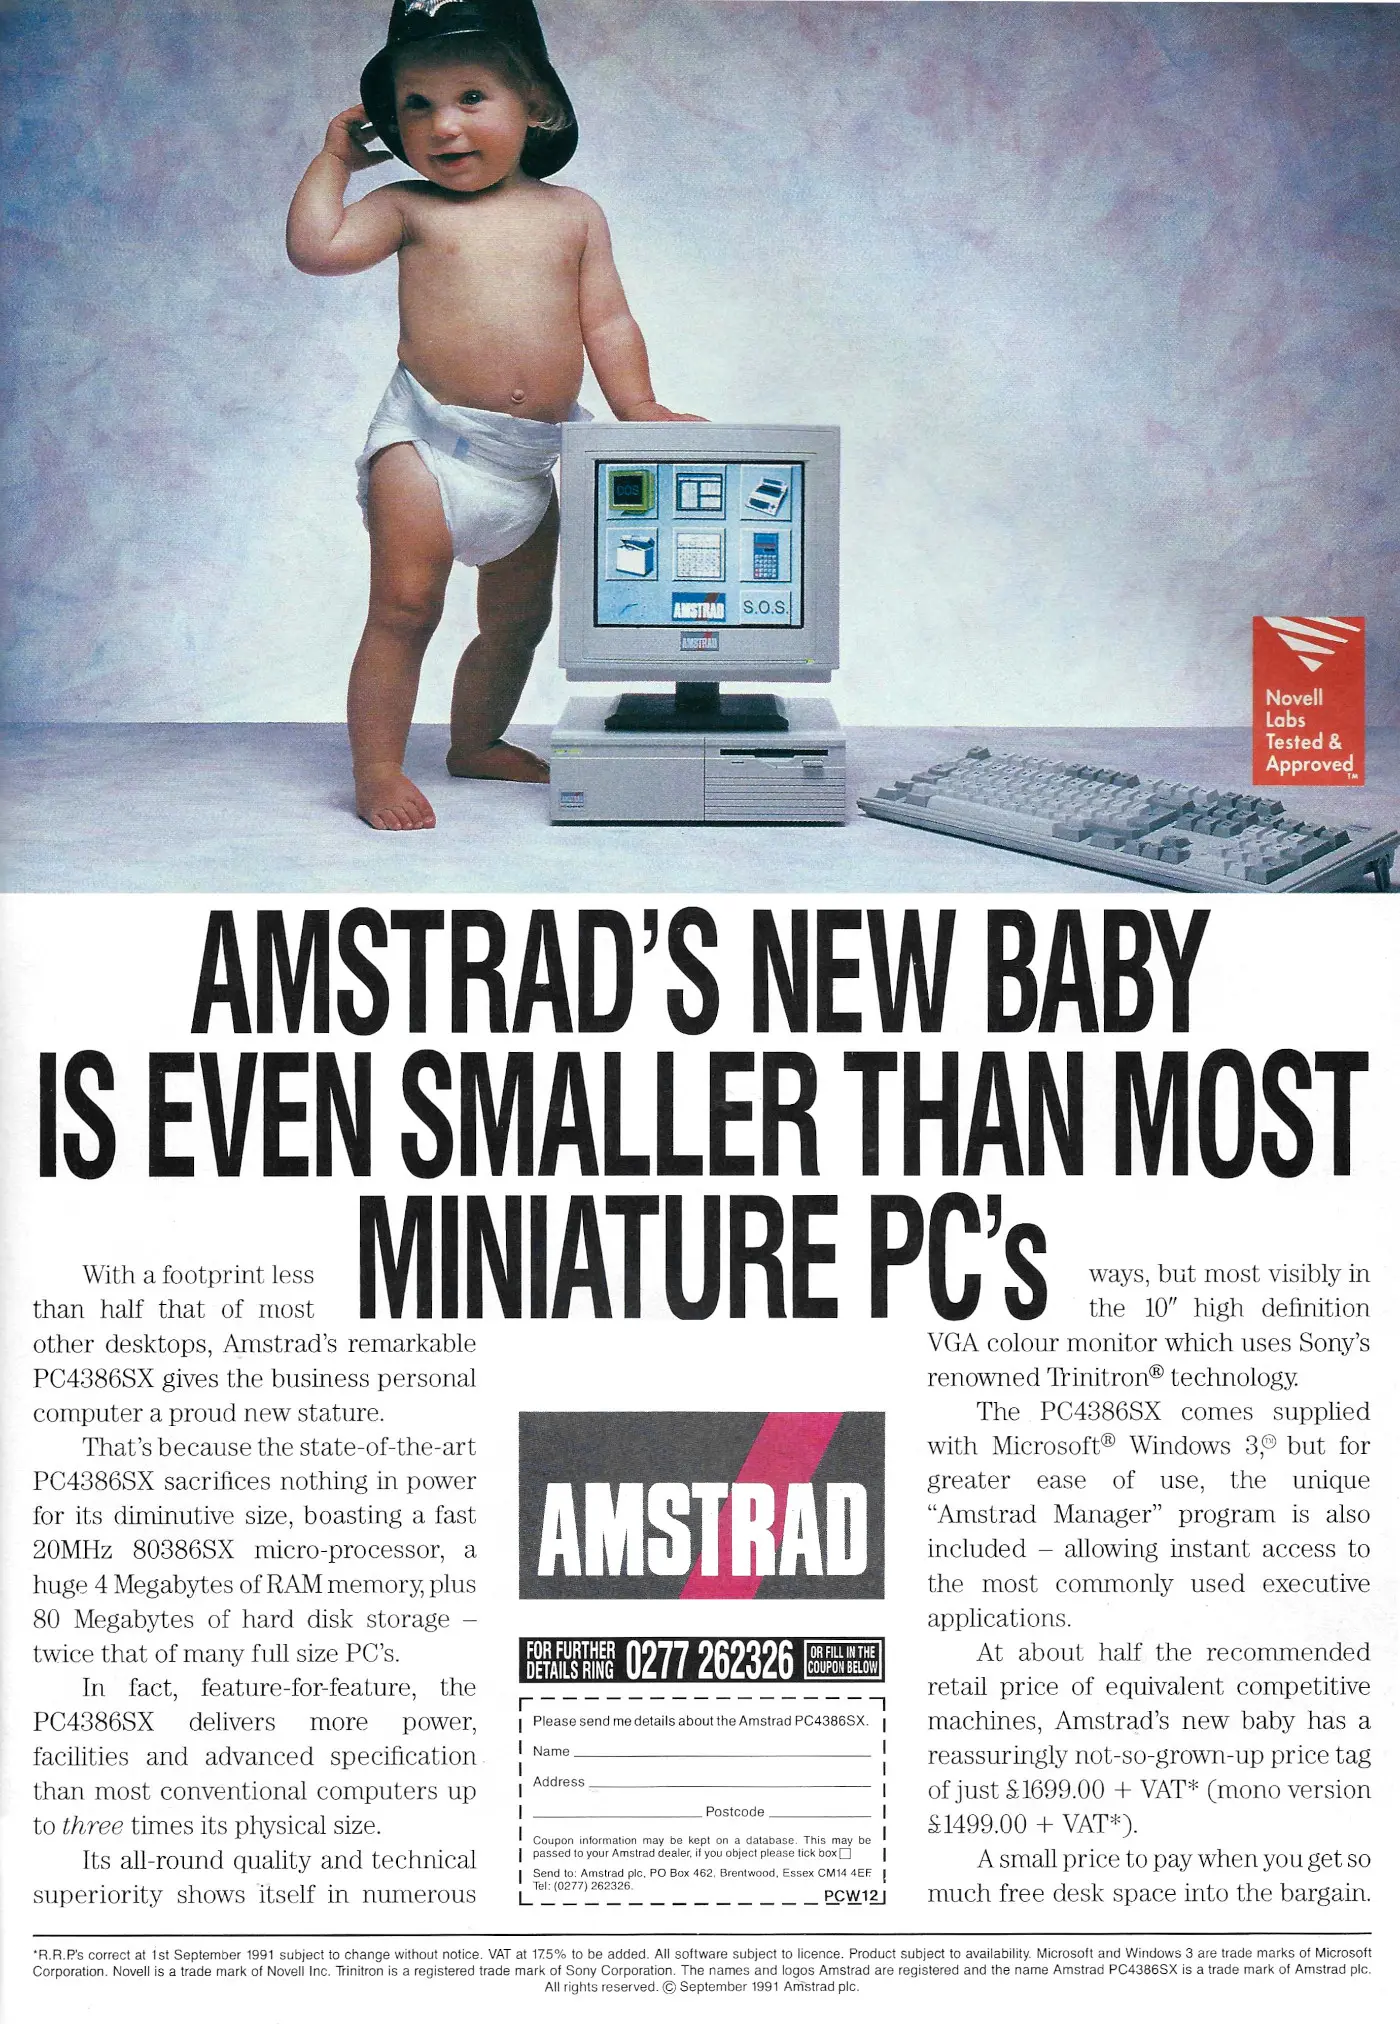 Amstrad Advert: Amstrad's new baby is even smaller than most miniature PCs, from Personal Computer World, December 1991